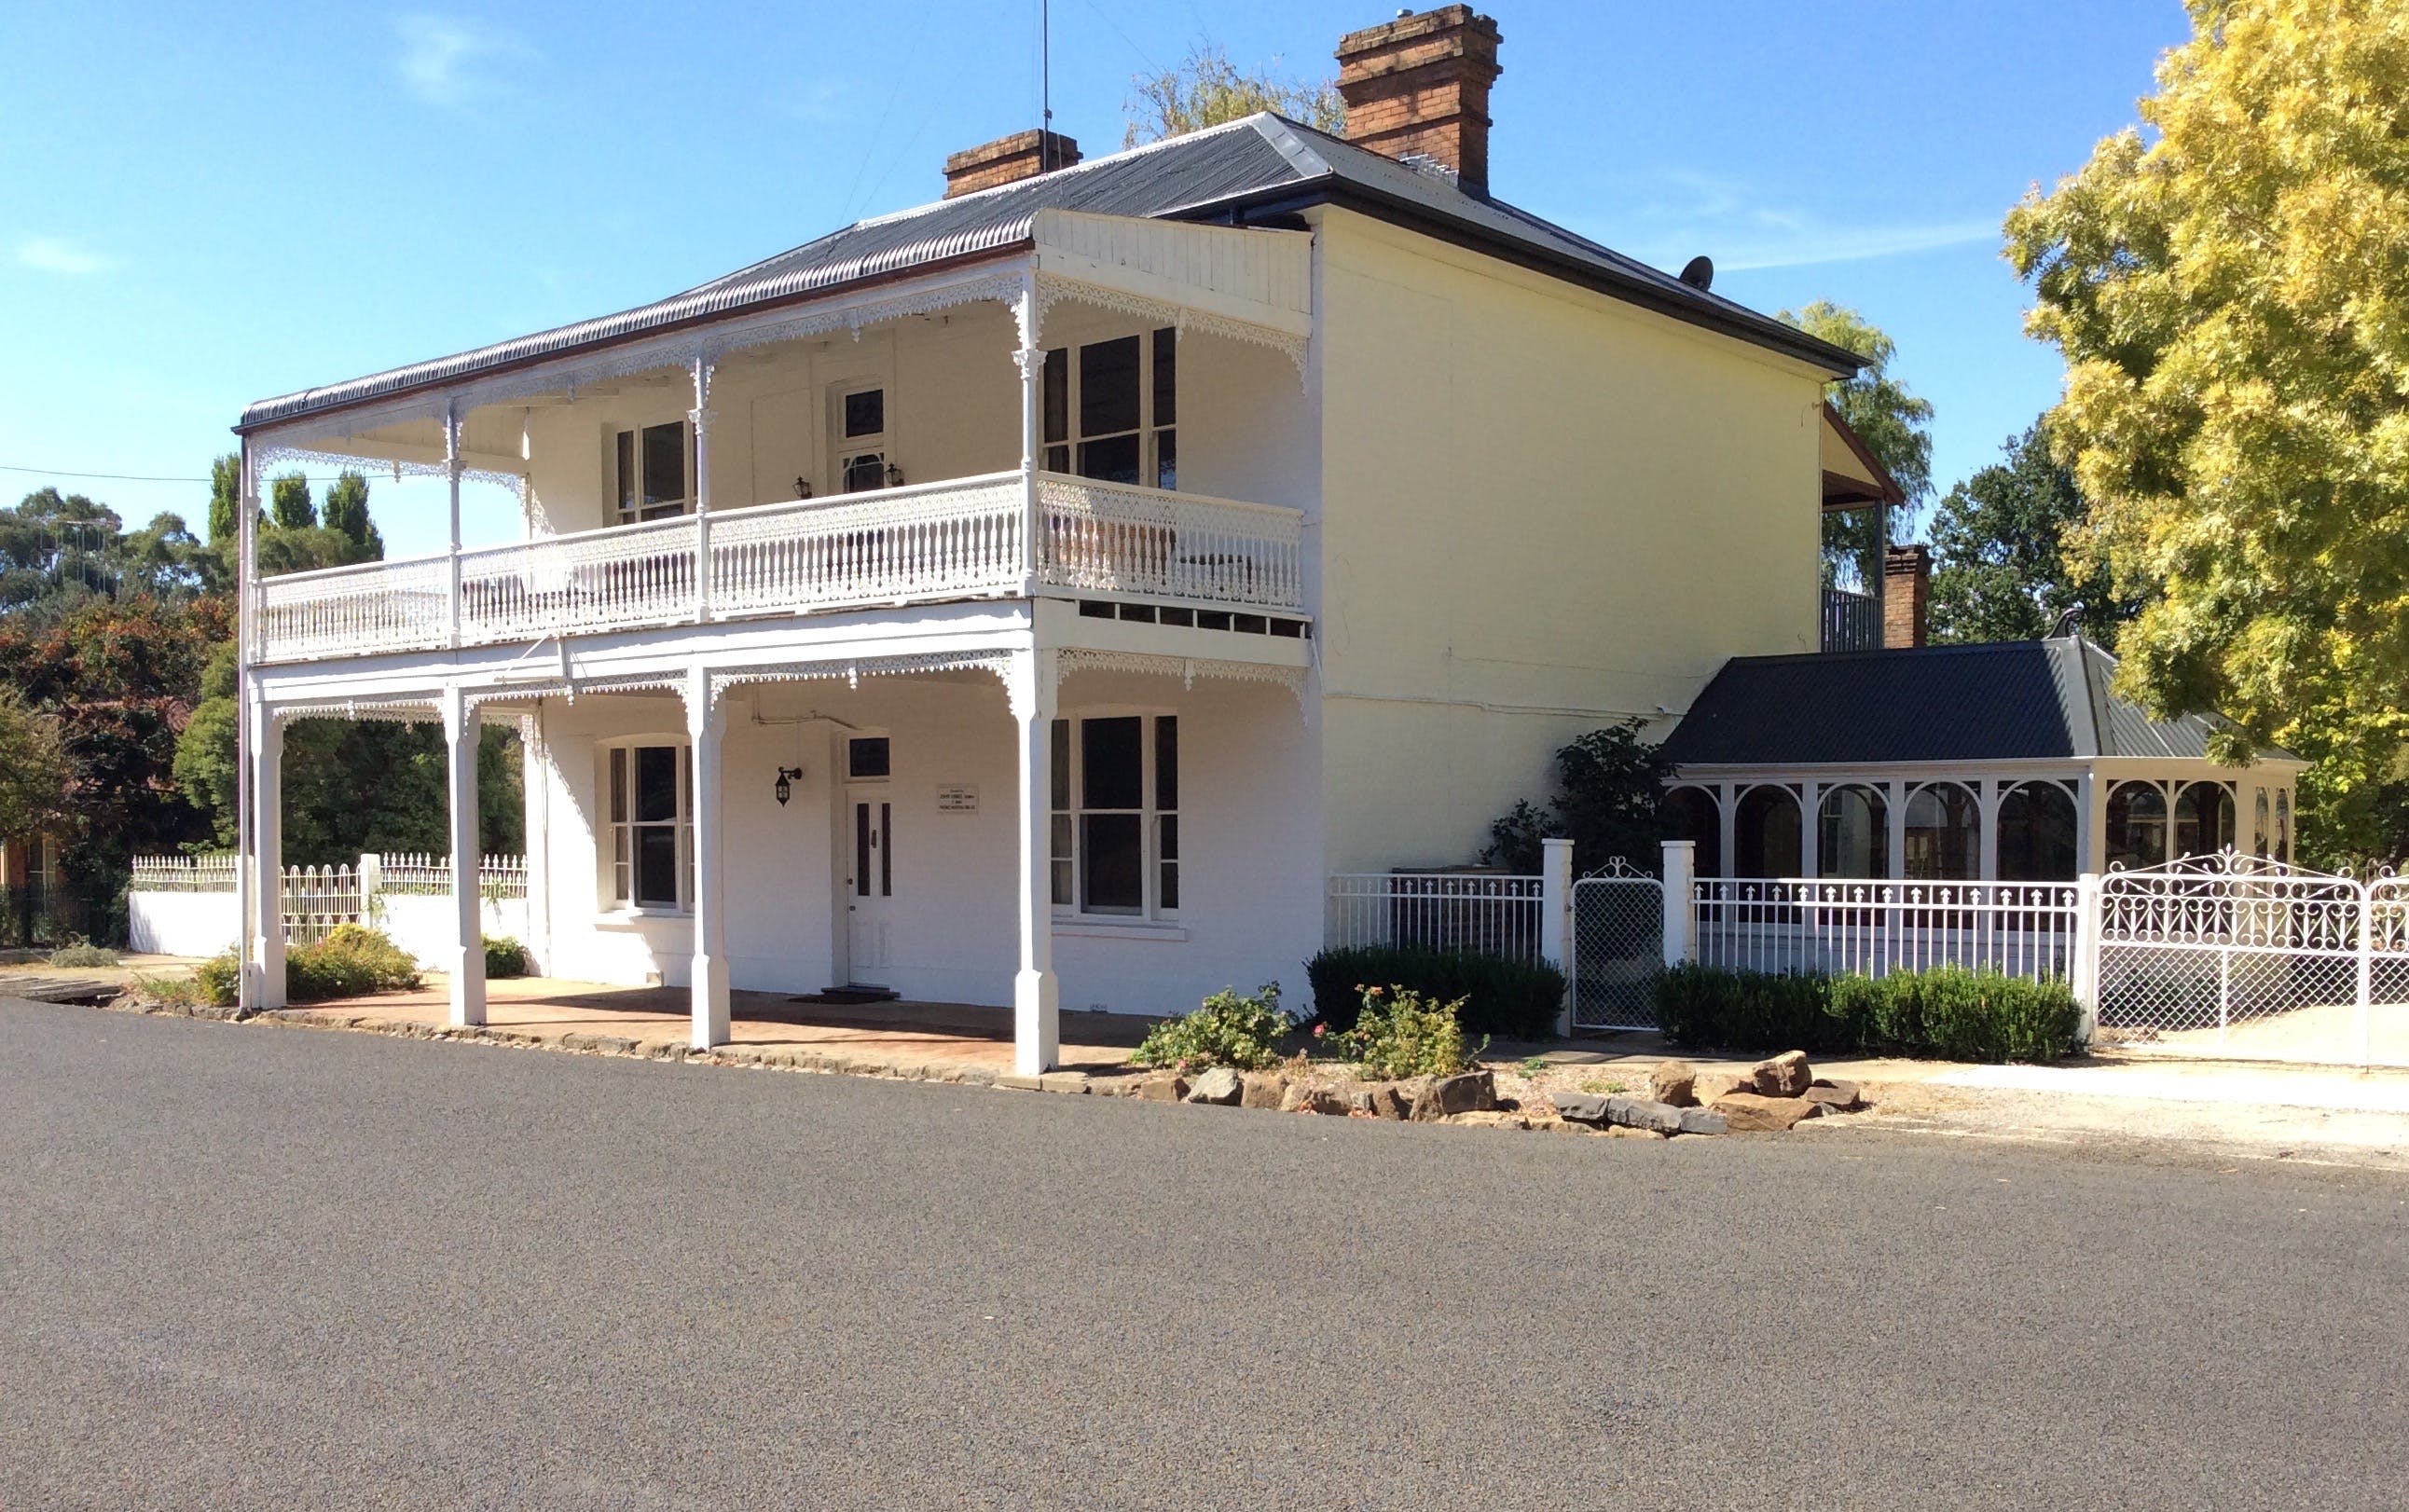 The White House Carcoar - Accommodation Port Macquarie